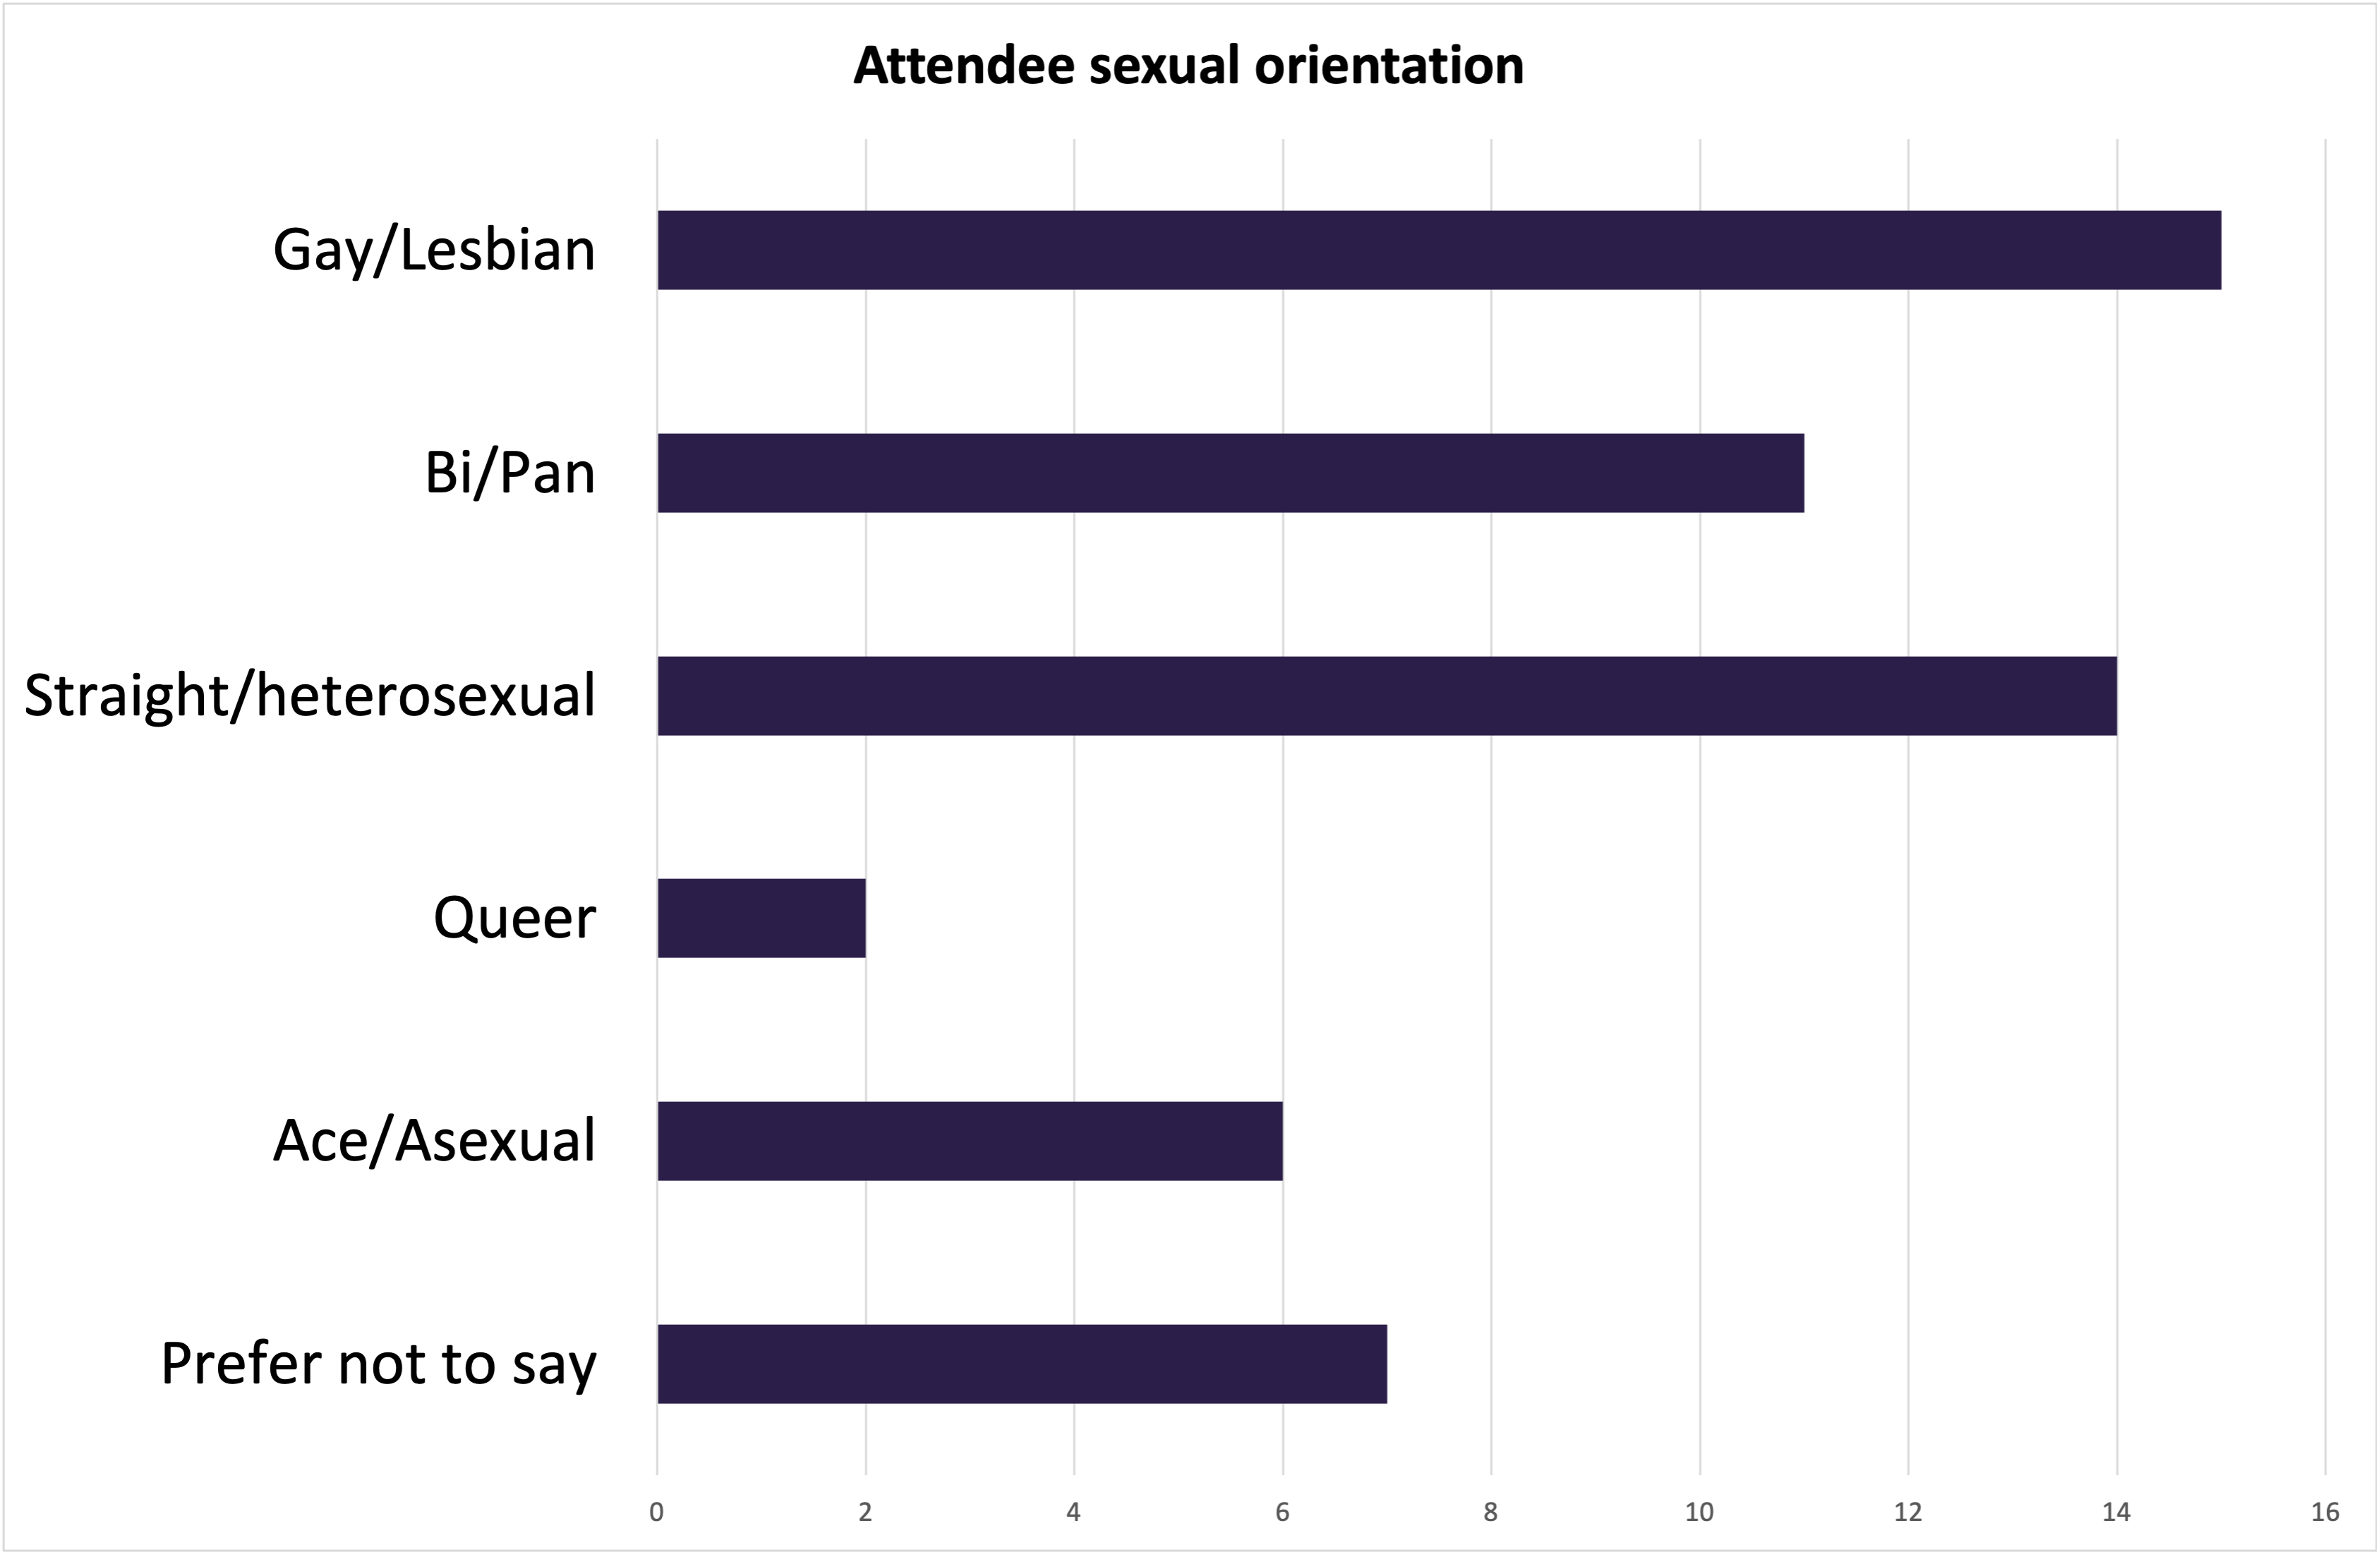 Bar chart of attendee's sexual orientations: Gay/Lesbian (15); Bi/Pan (11); Straight/heterosexual (14); Queer (2); Ace/asexual (6); Prefer not to say (7)